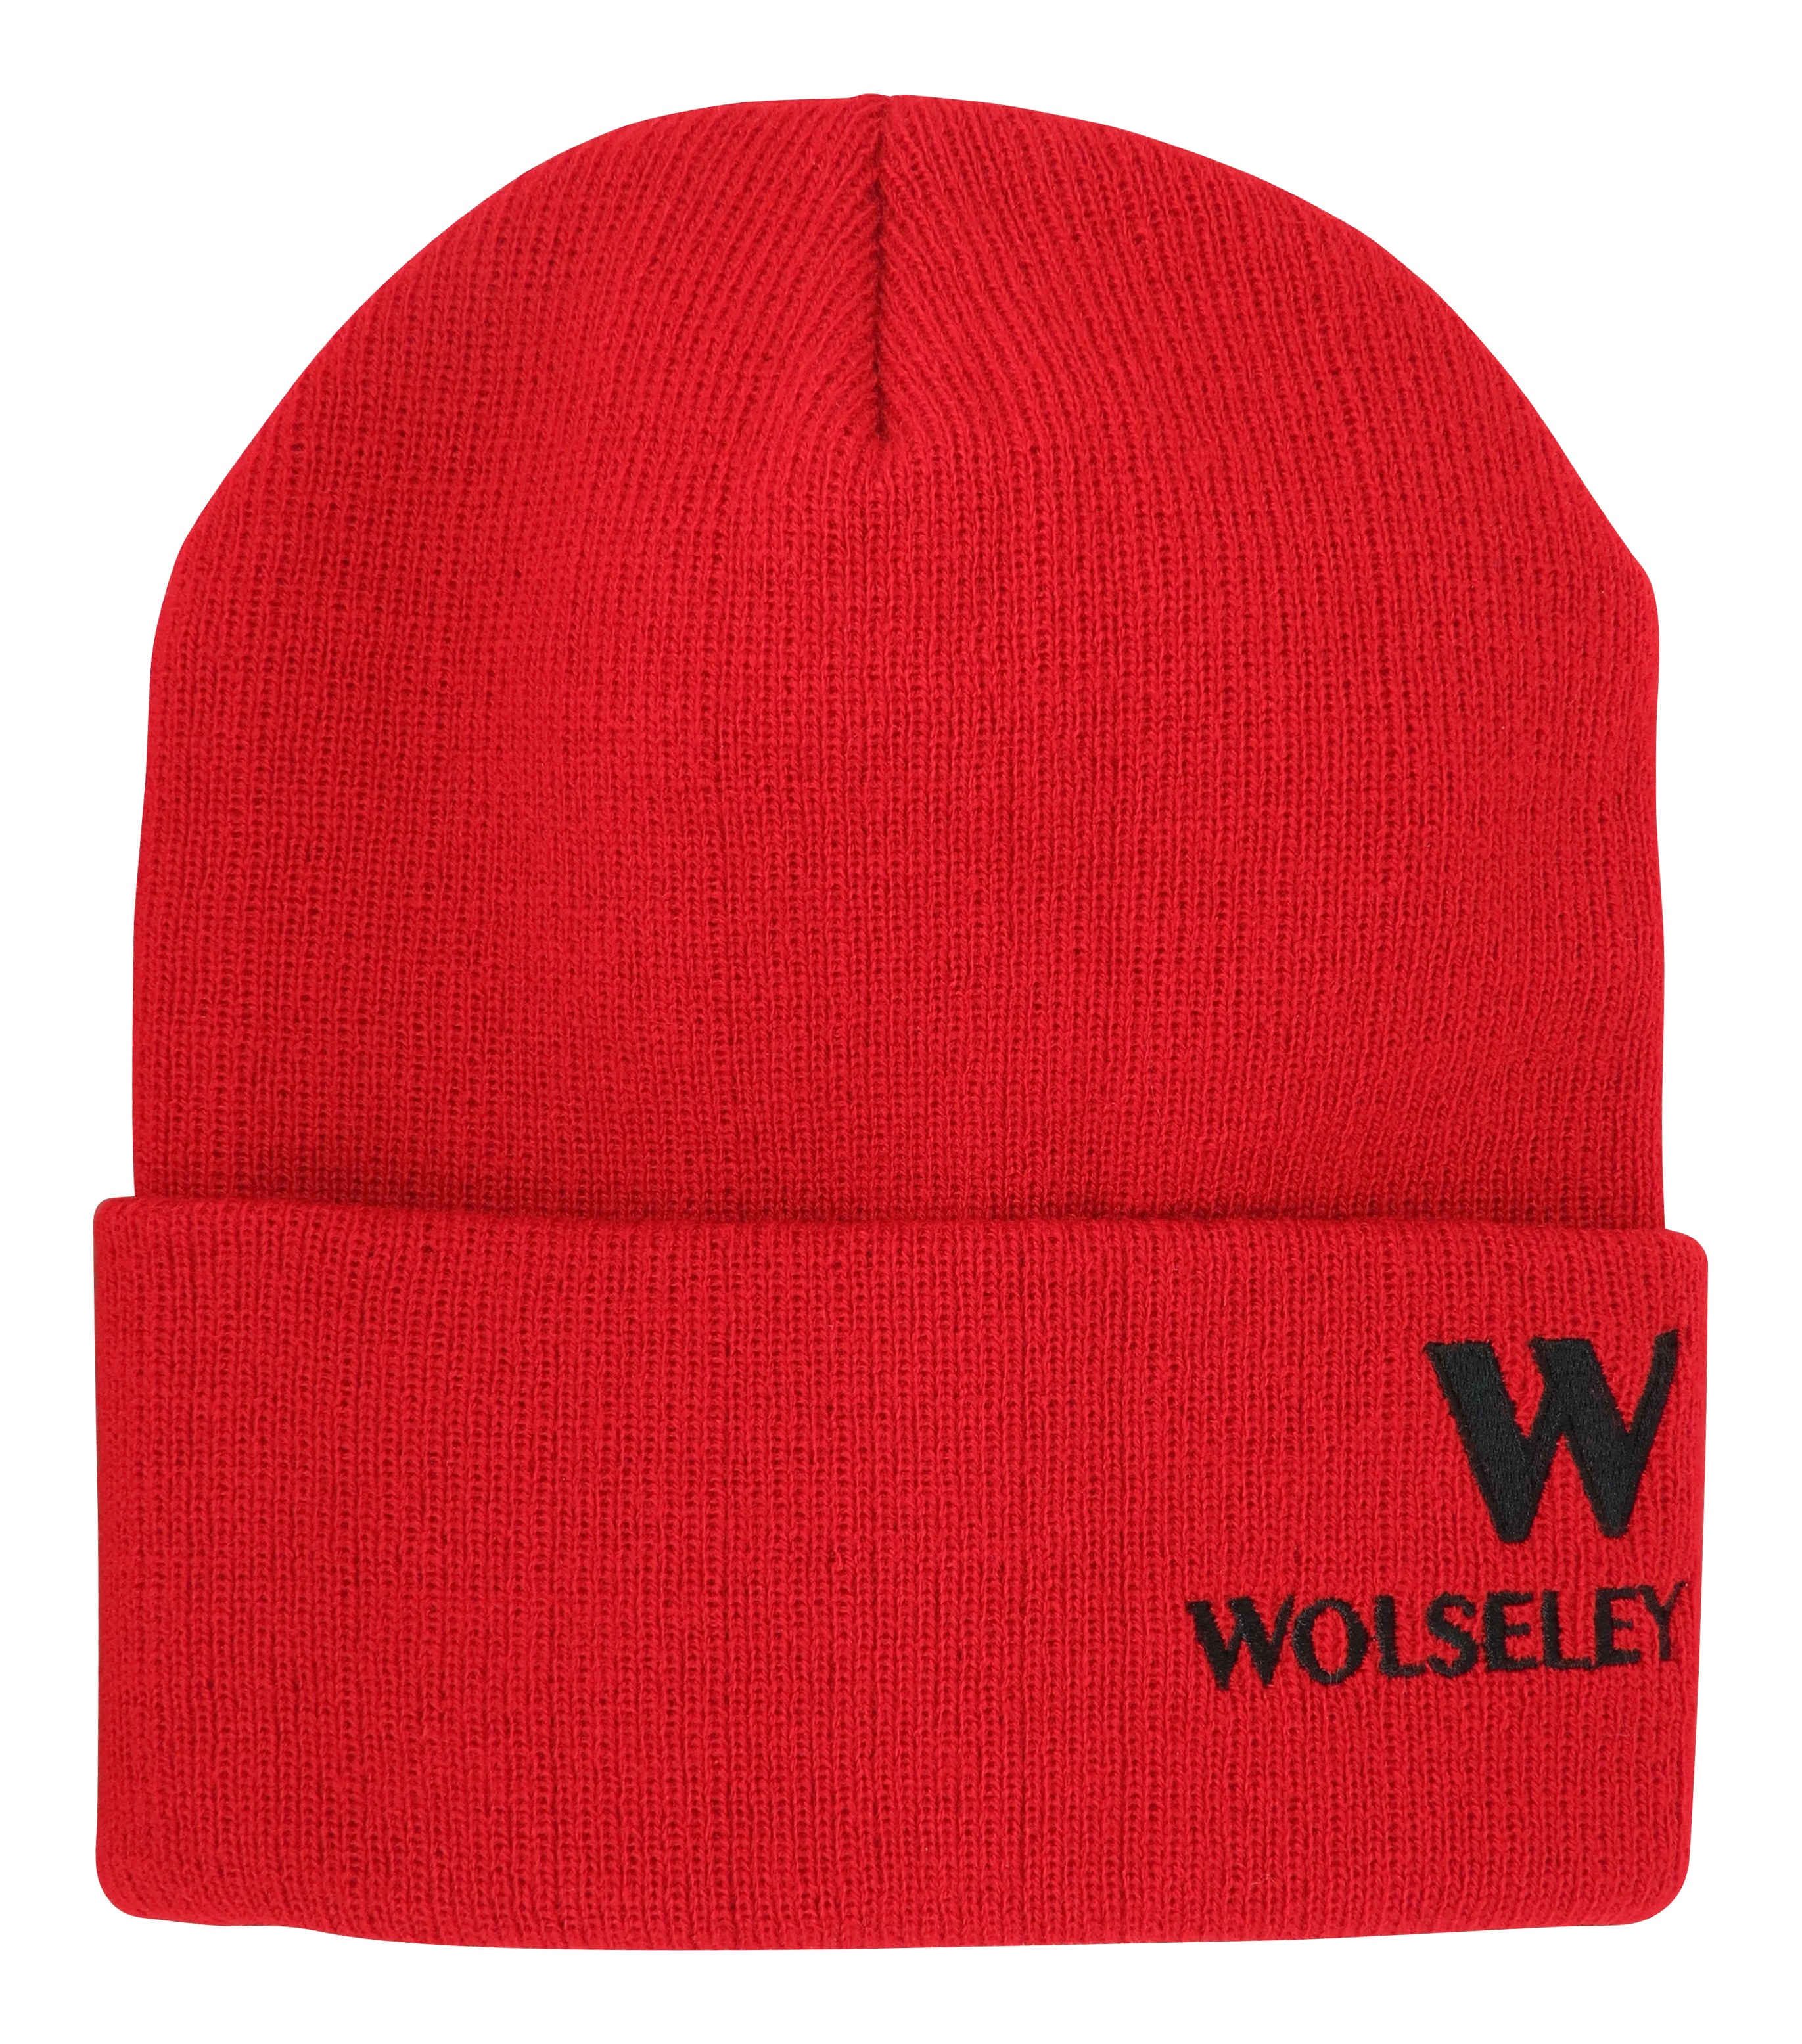 Beanie Hat | Award Winning Promotional Merchandise & Products Printed ...